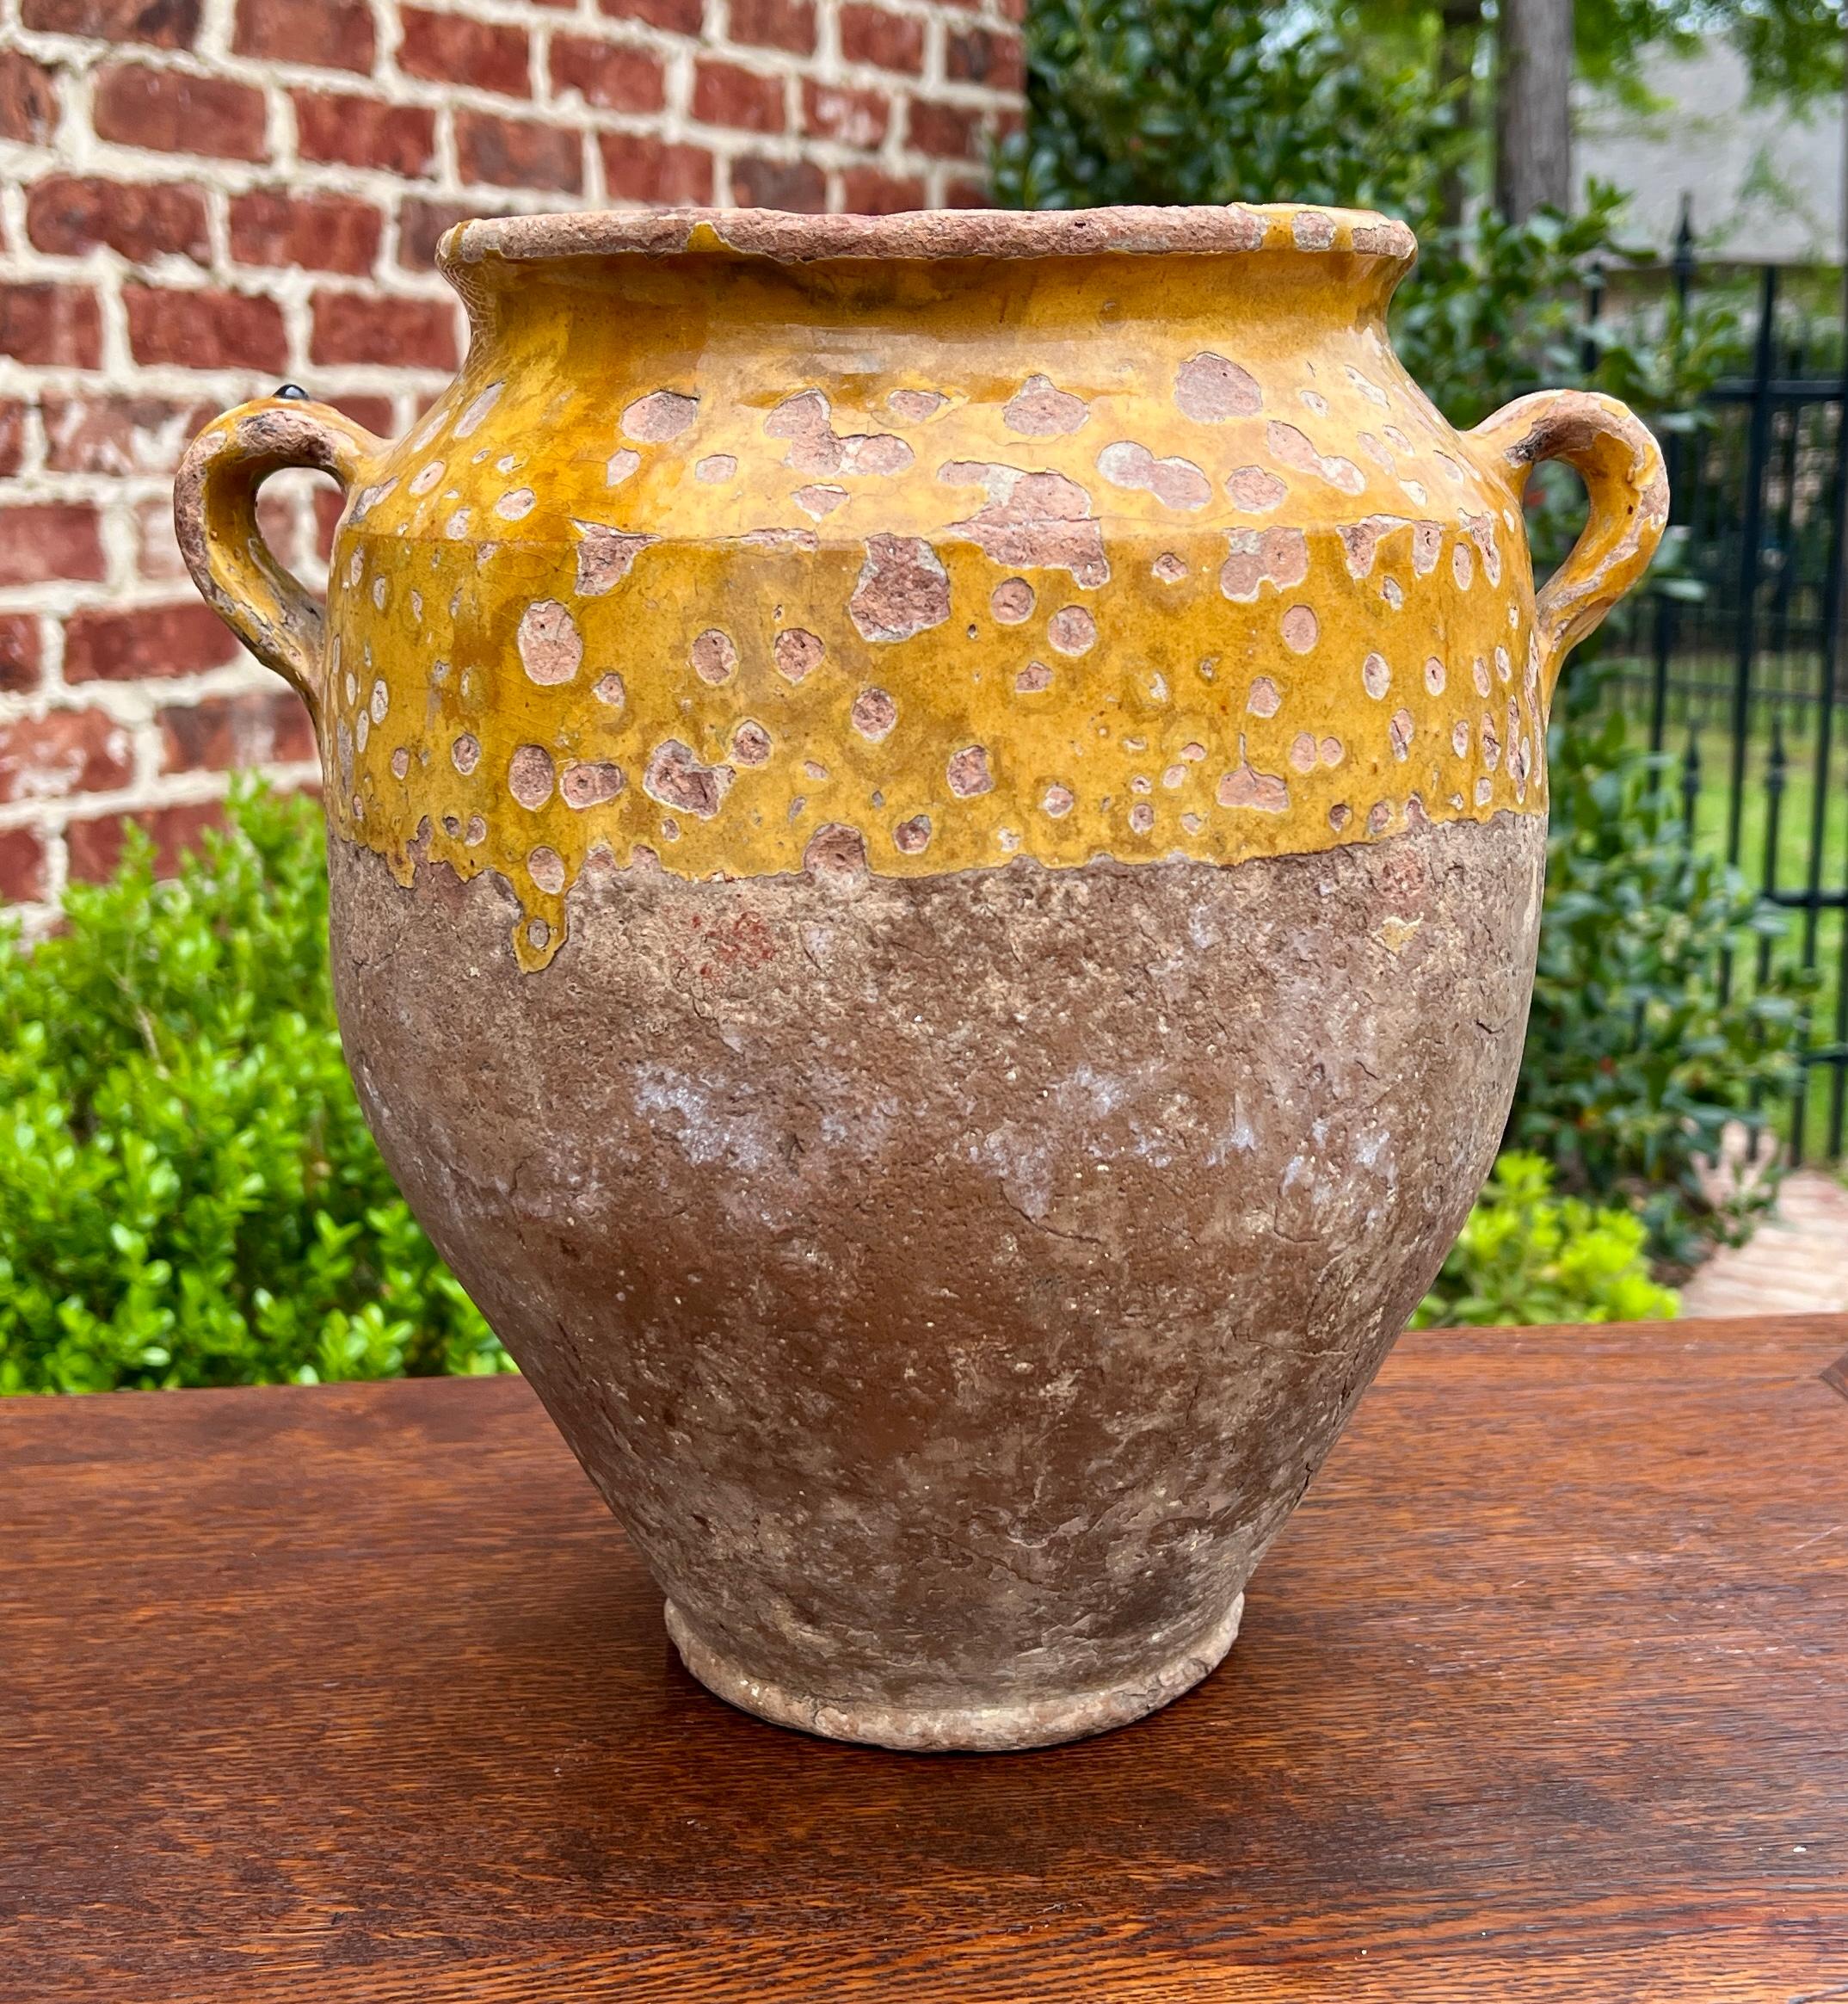  Antique French Country Large Yellow Ochre Glazed Confit Pot Pottery Jar #1~~12.5